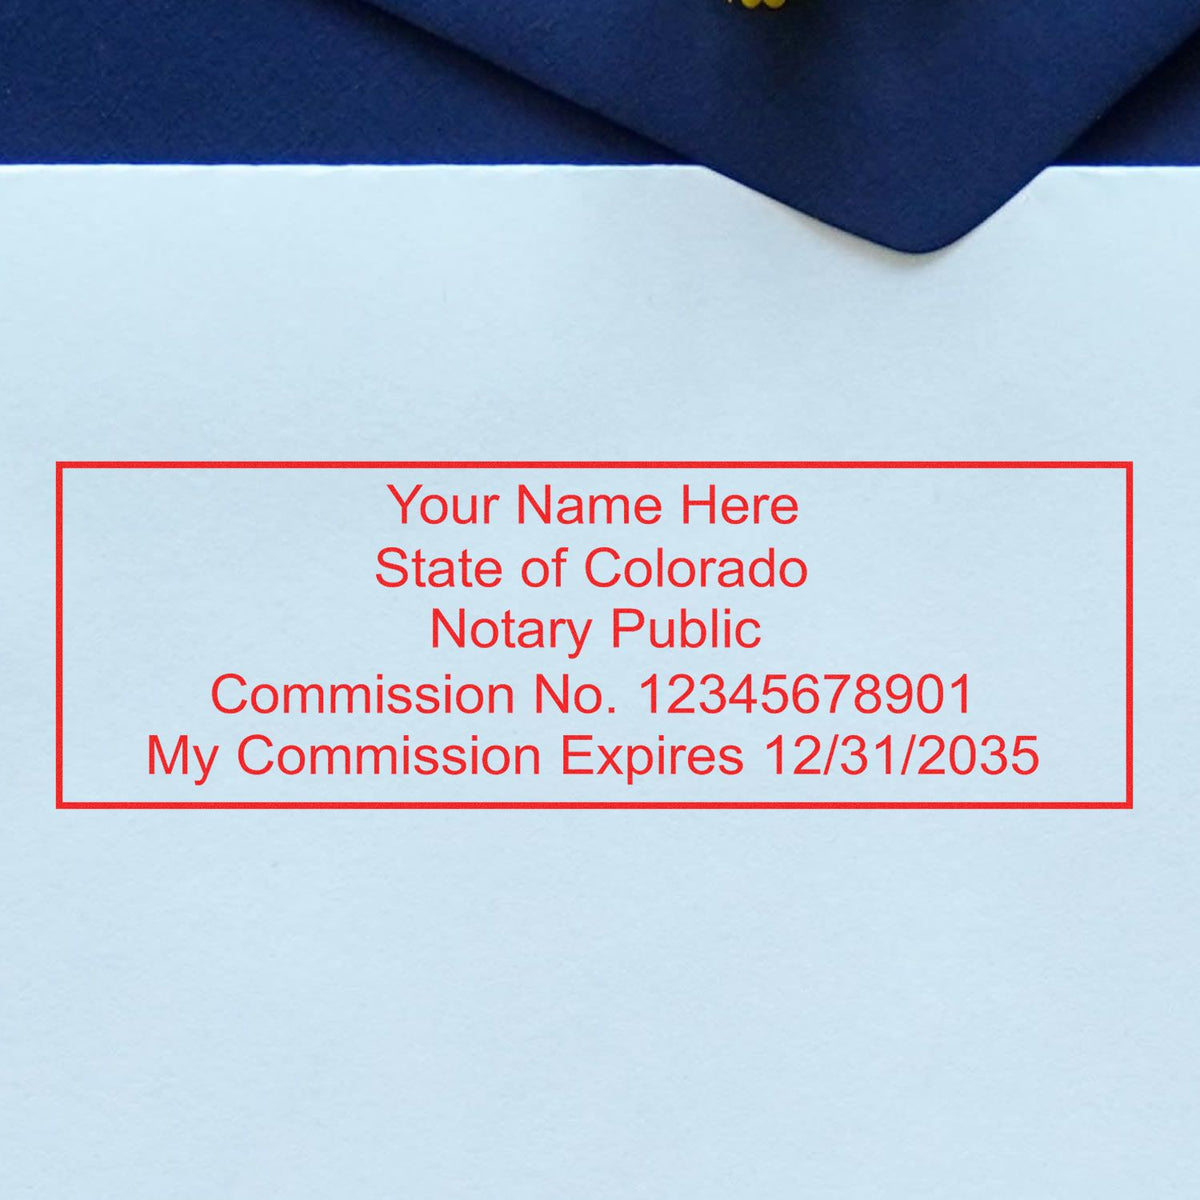 The Heavy-Duty Colorado Rectangular Notary Stamp stamp impression comes to life with a crisp, detailed photo on paper - showcasing true professional quality.